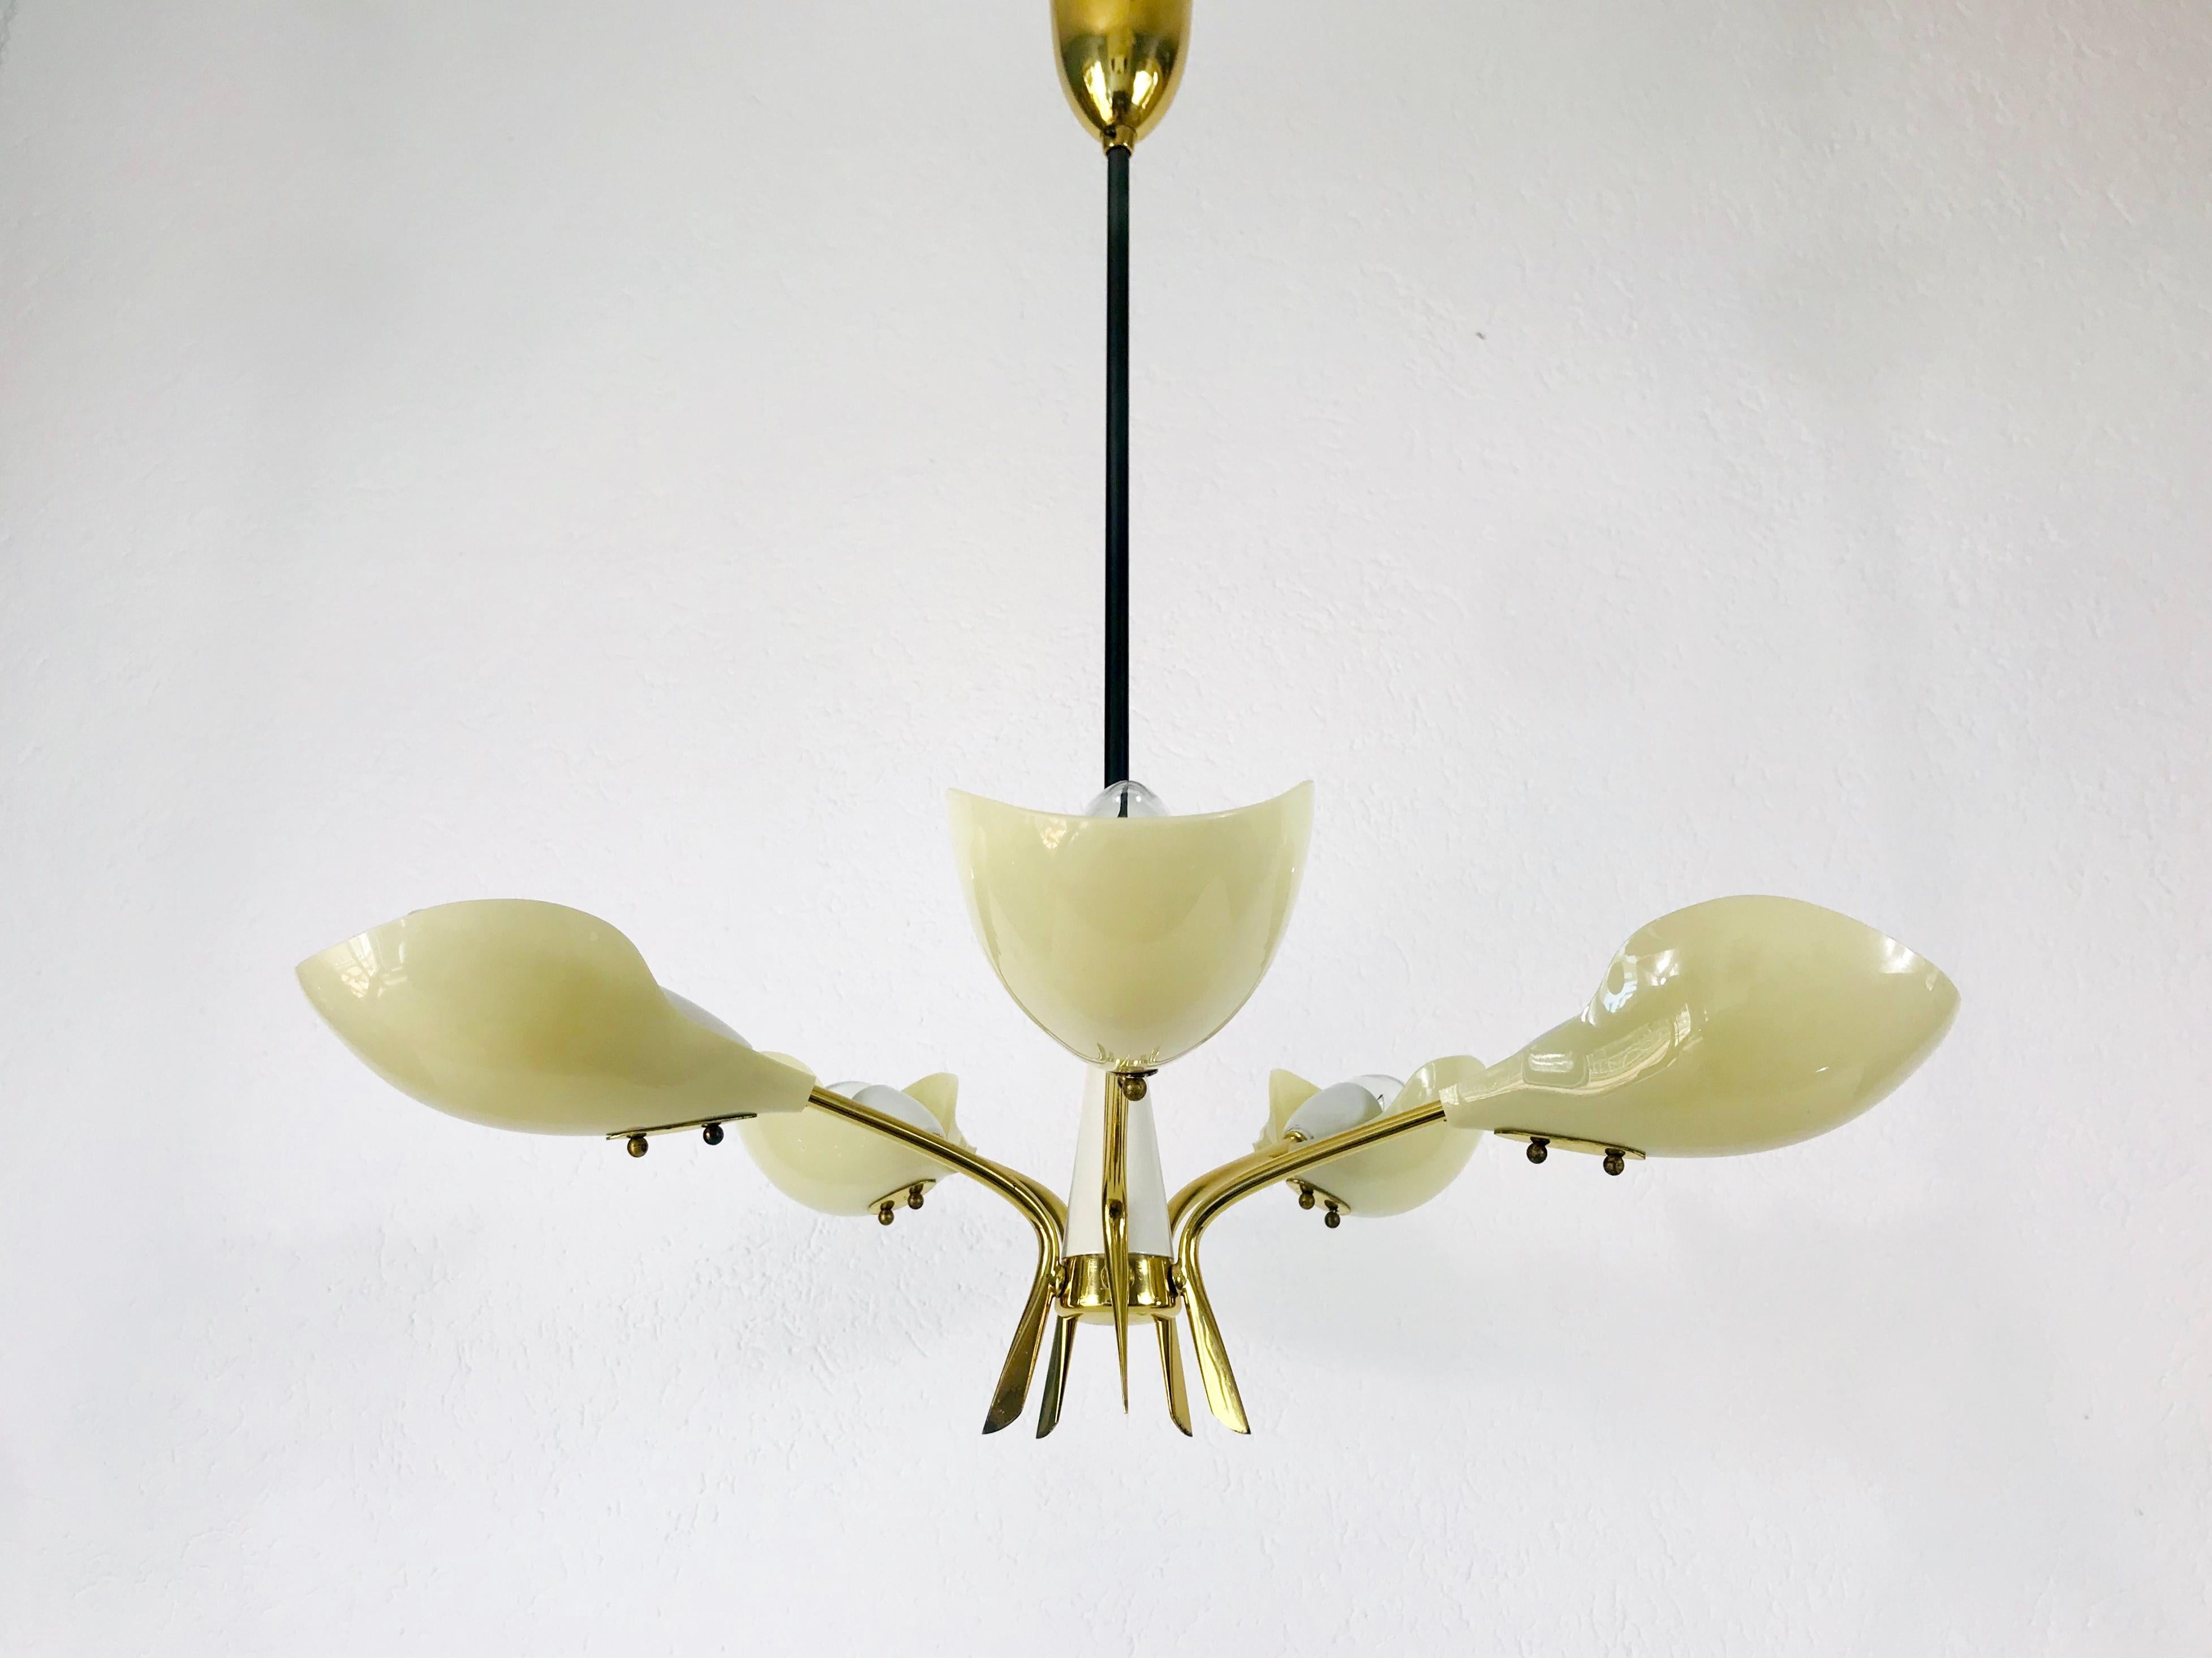 A Sputnik chandelier made in Italy in the 1950s. It is fascinating with its five brass arms, each of it with an E14 light bulb. The arms have a beige color. The shape of the light is similiar to a spider. 

Very good vintage condition.

The